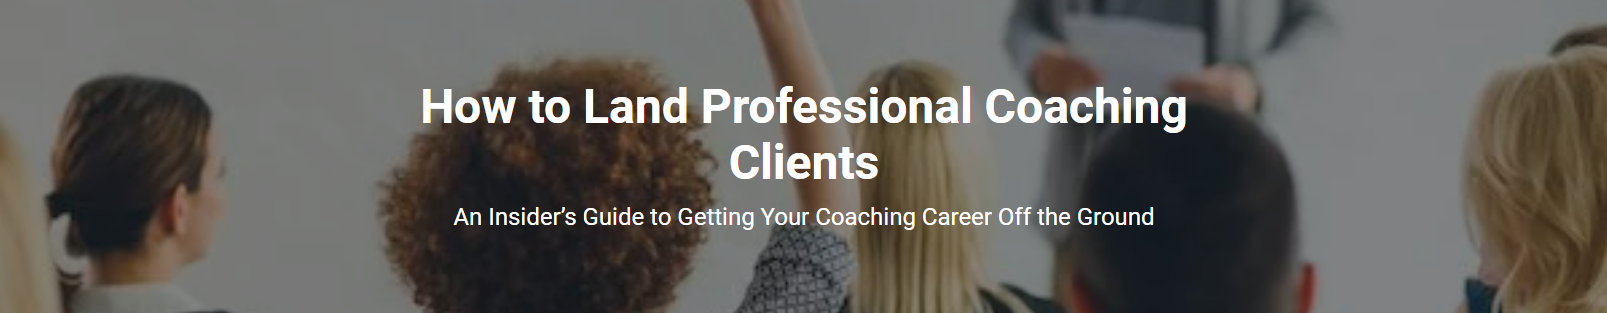 How to Land Professional Coaching Clients Banner